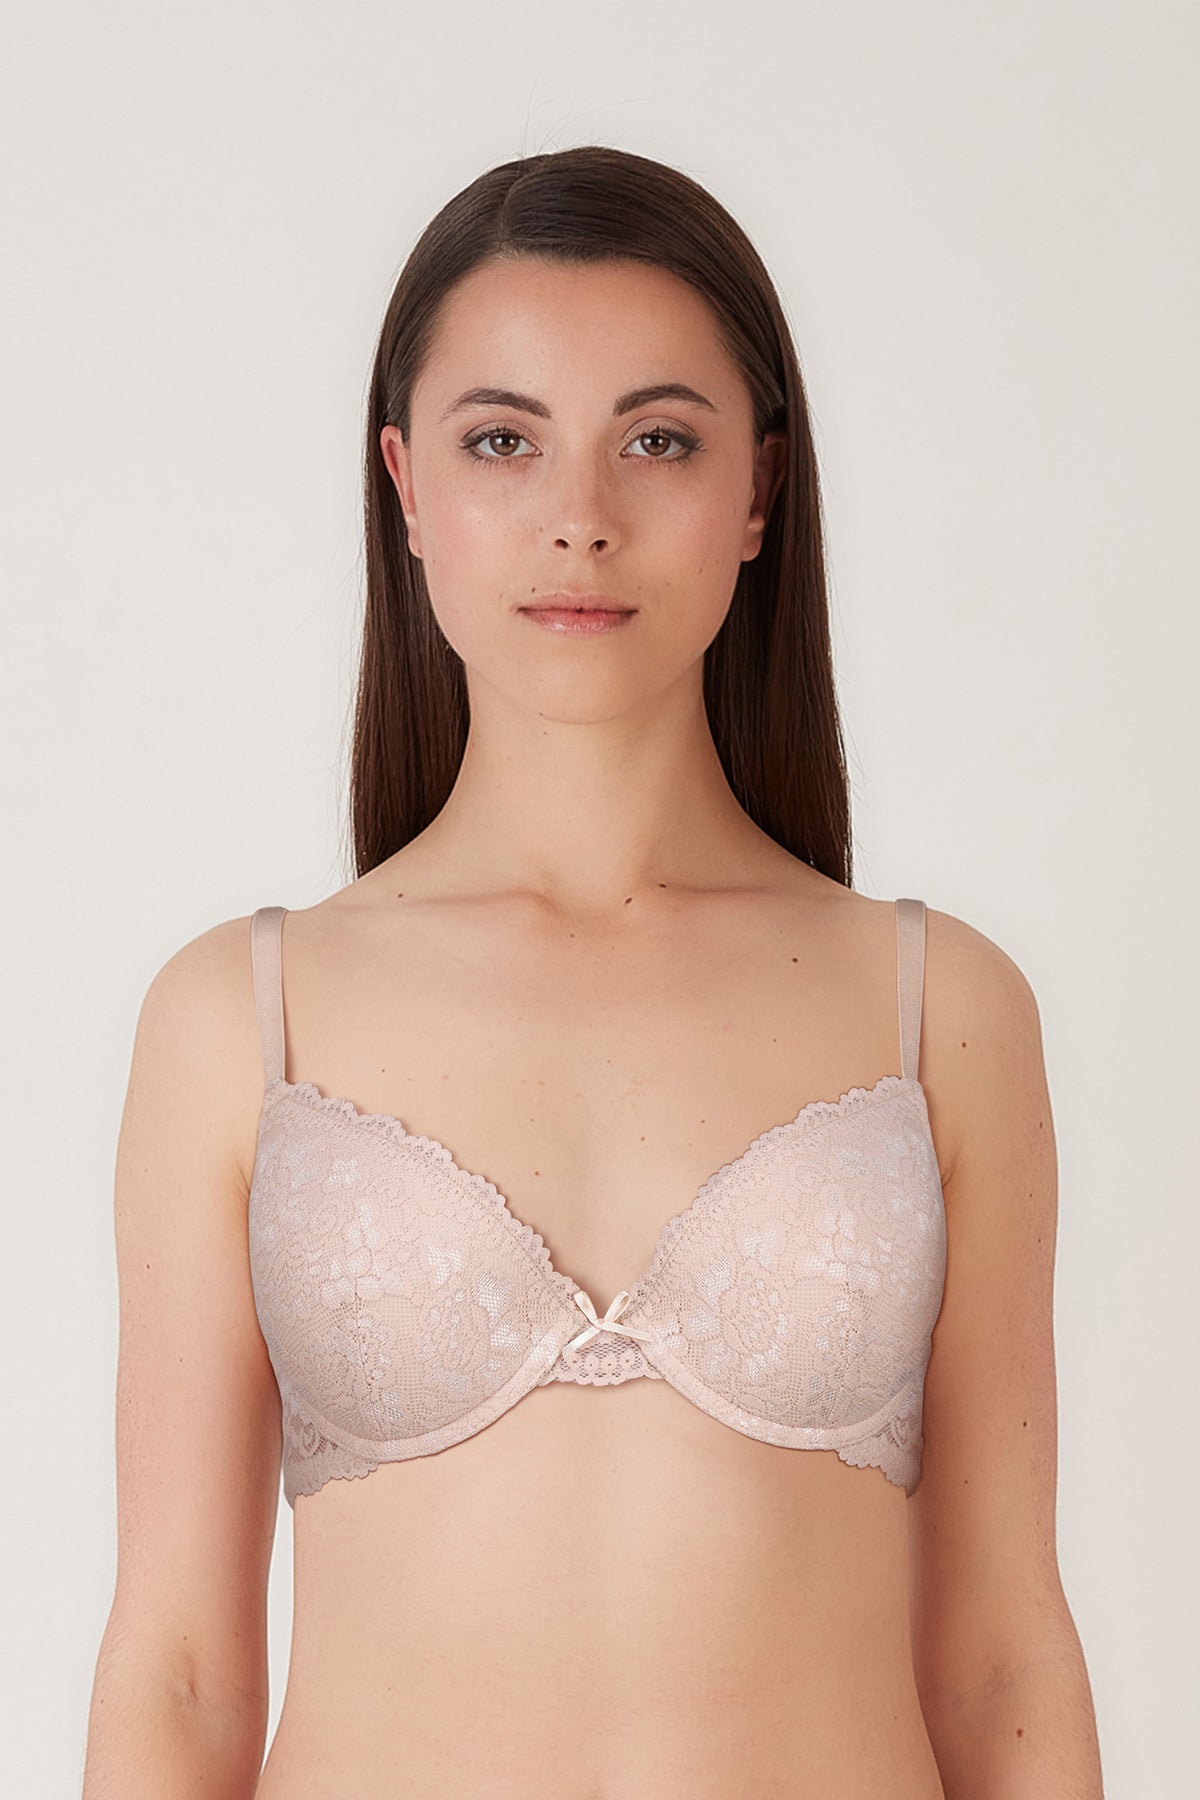 BLS - Passion Wired And Pushup Lace Bra - Piony